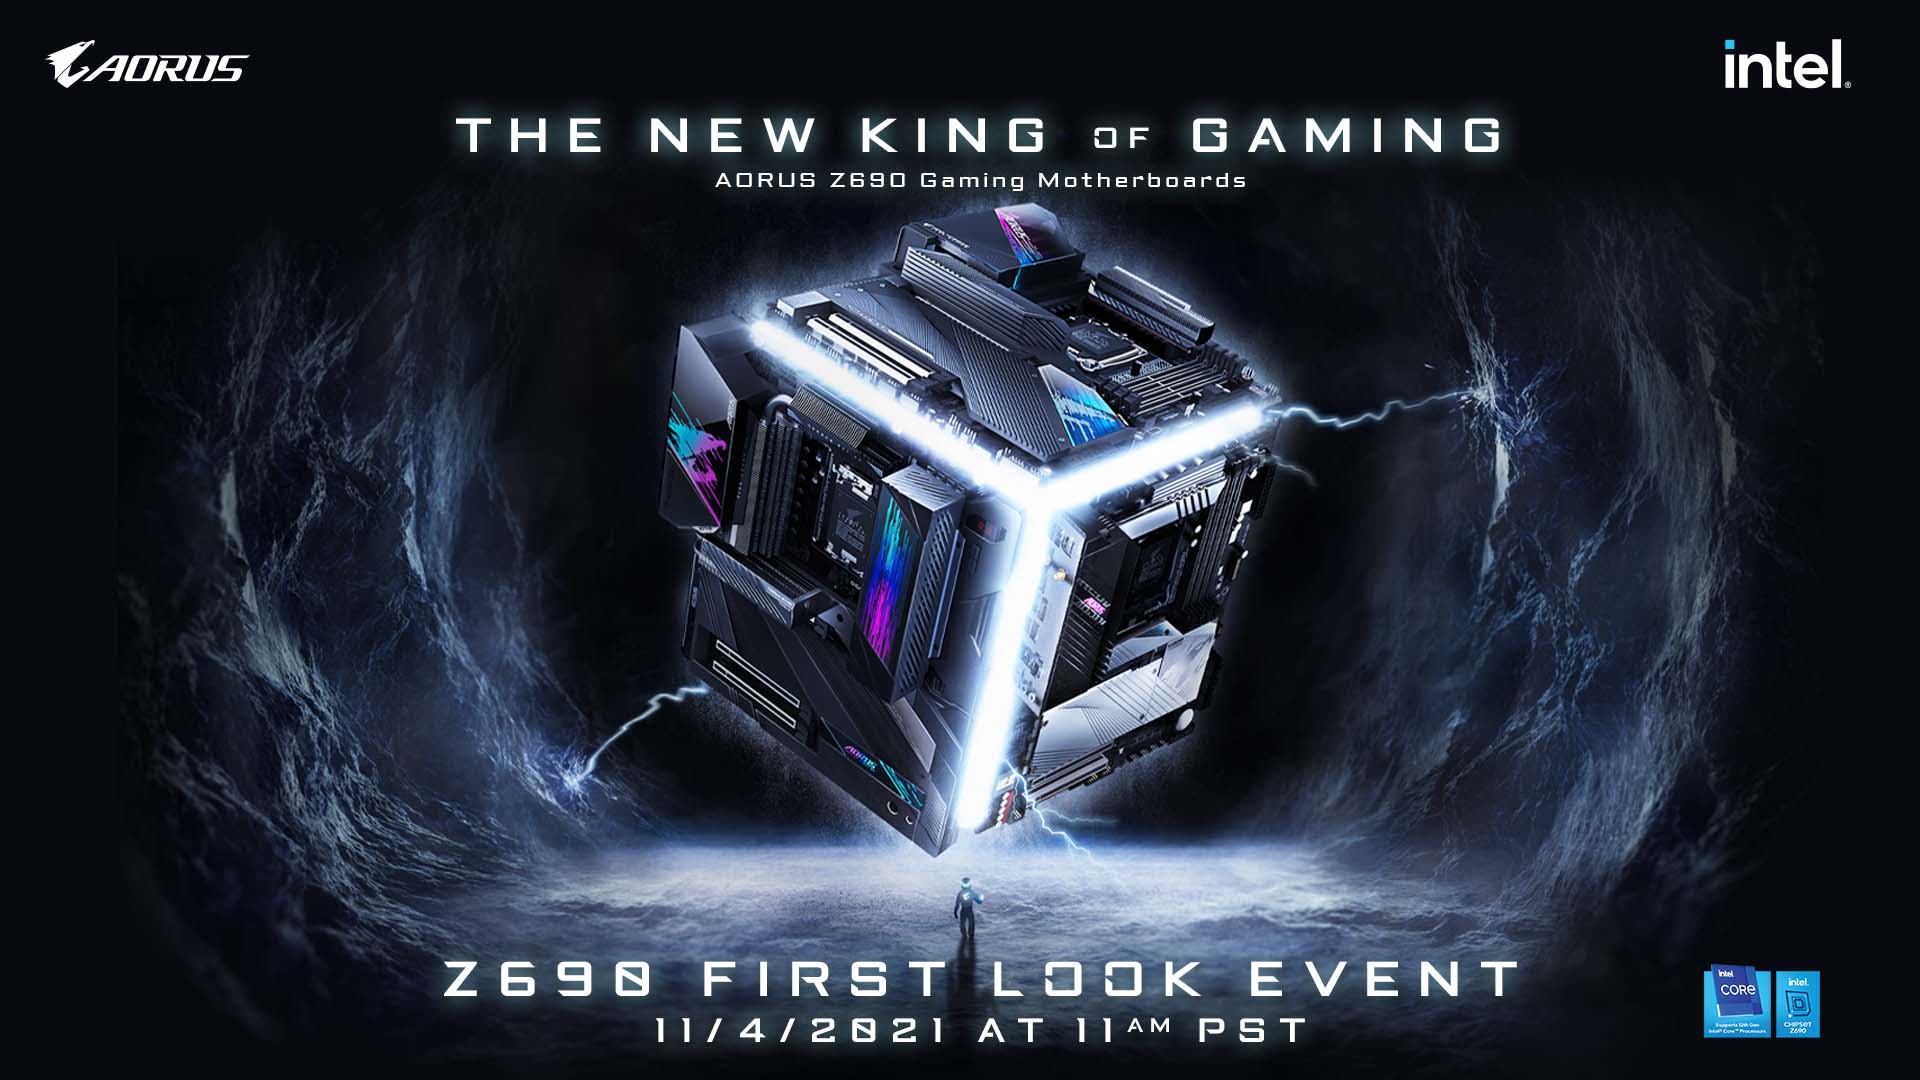  Unleash the power of Intel’s 12th gen processors with the AORUS Z690 motherboards 